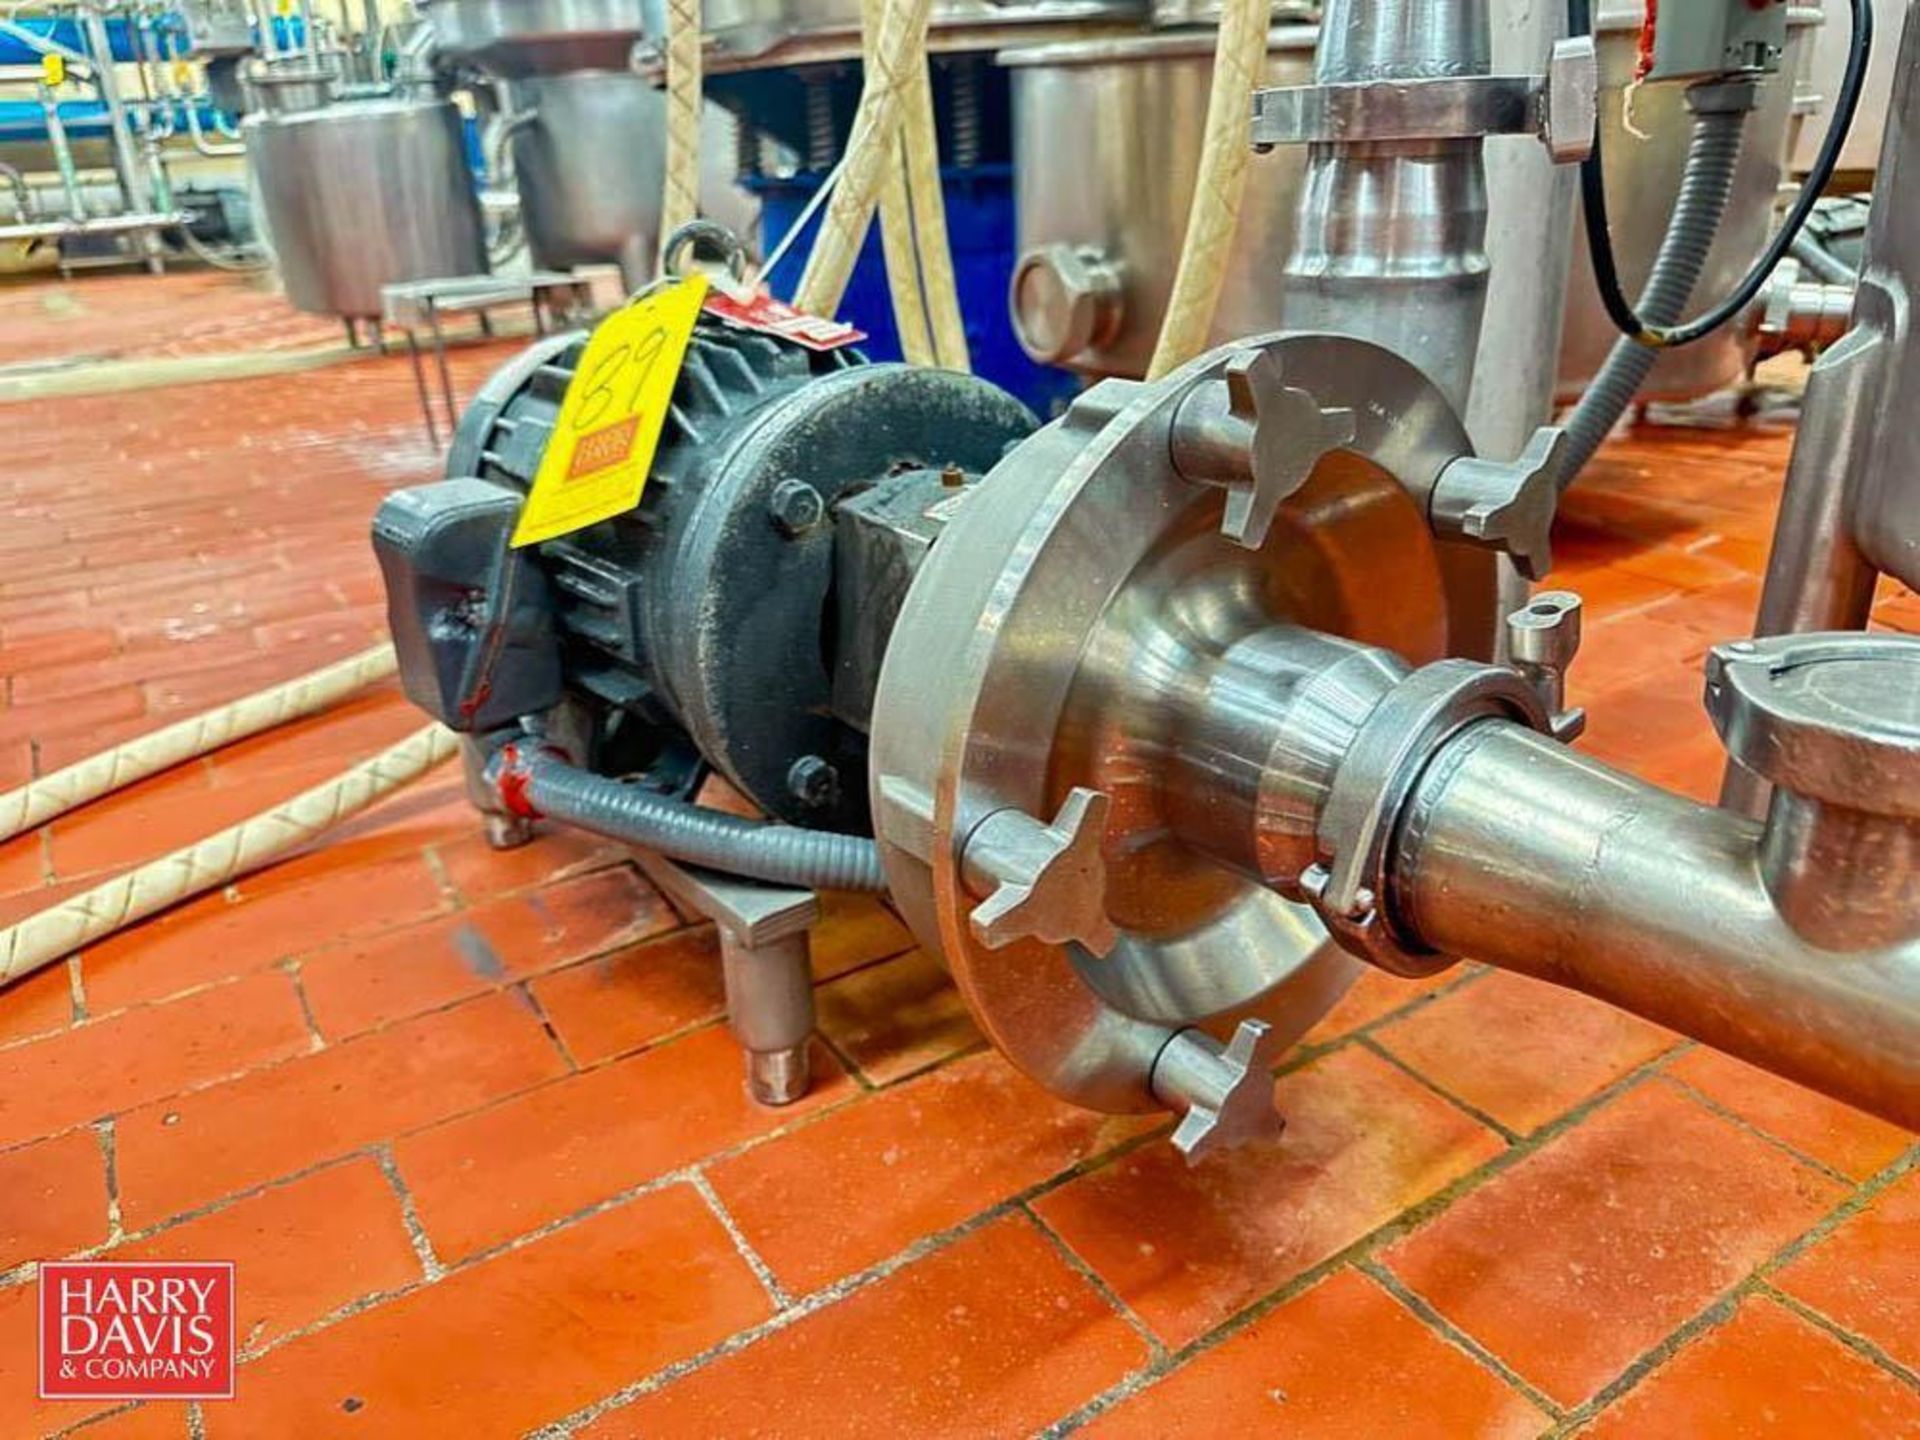 Fristam Centrifugal Pump, Model: FPX3541 with Baldor Motor: Mounted on S/S Base - Rigging Fee: $150